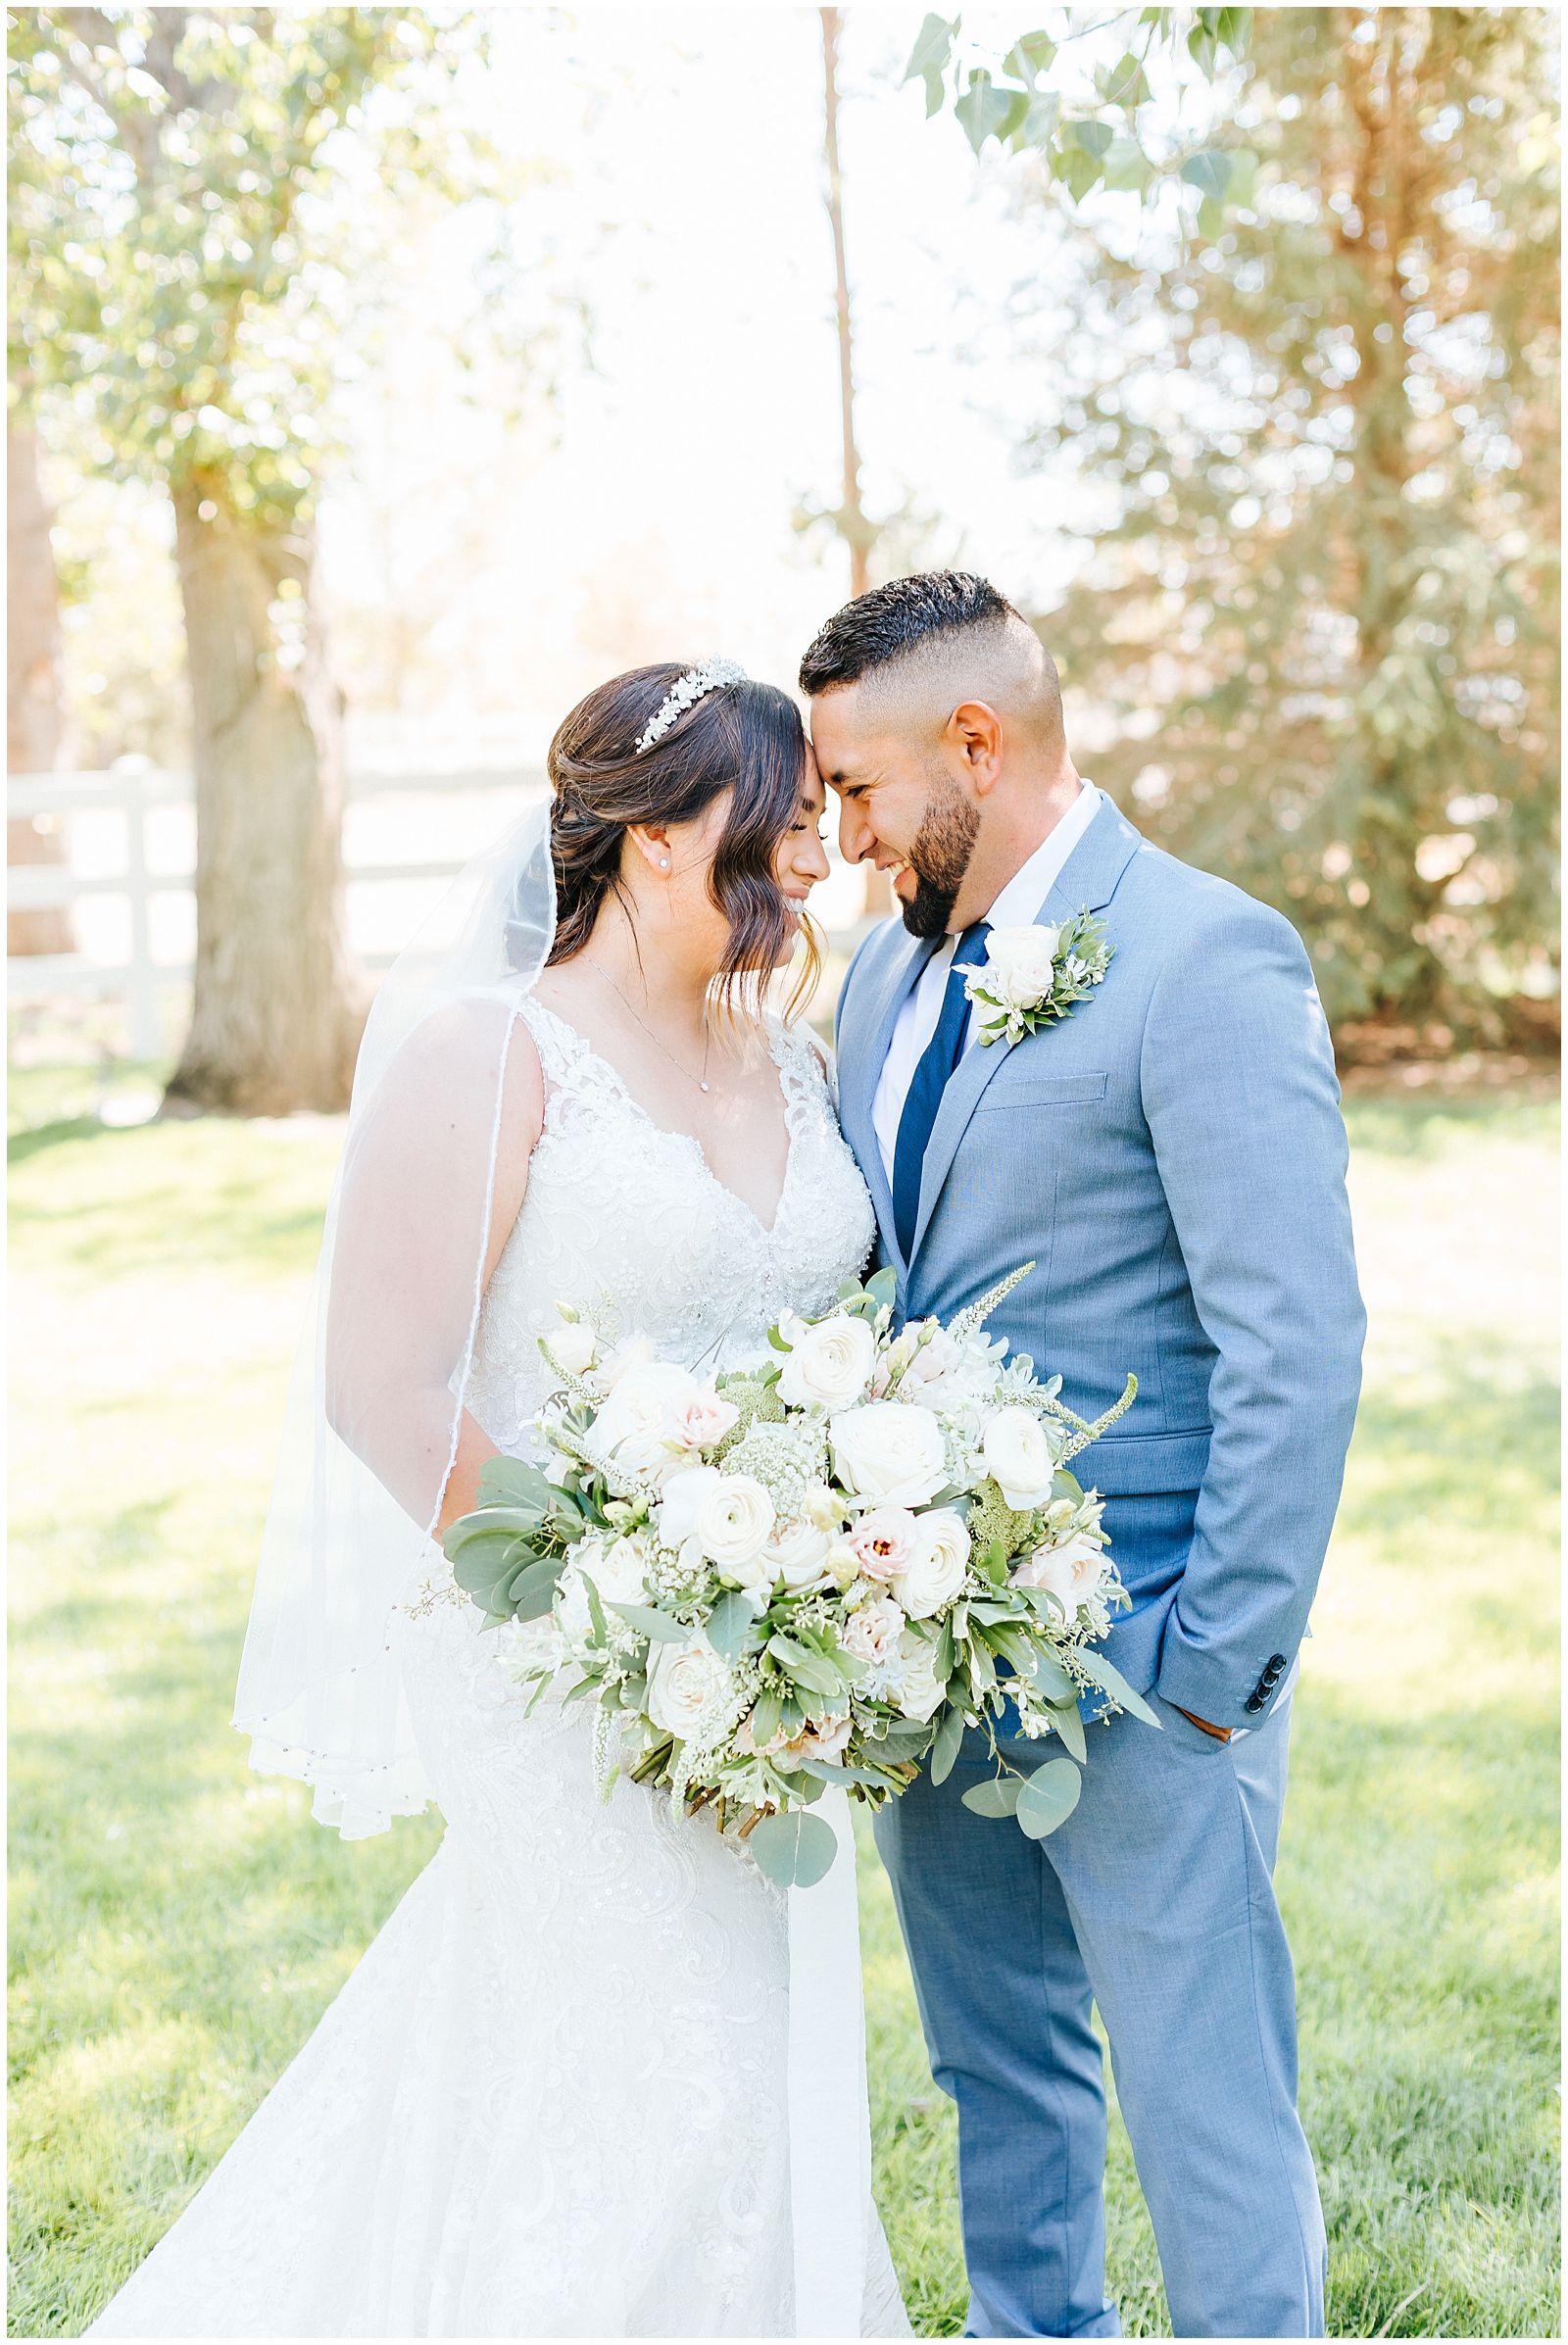 Bride and Groom Wedding Day Portraits with White Bridal Bouquet and Grey Navy Suit at Dusty Blue Fox Canyon Vineyards Wedding